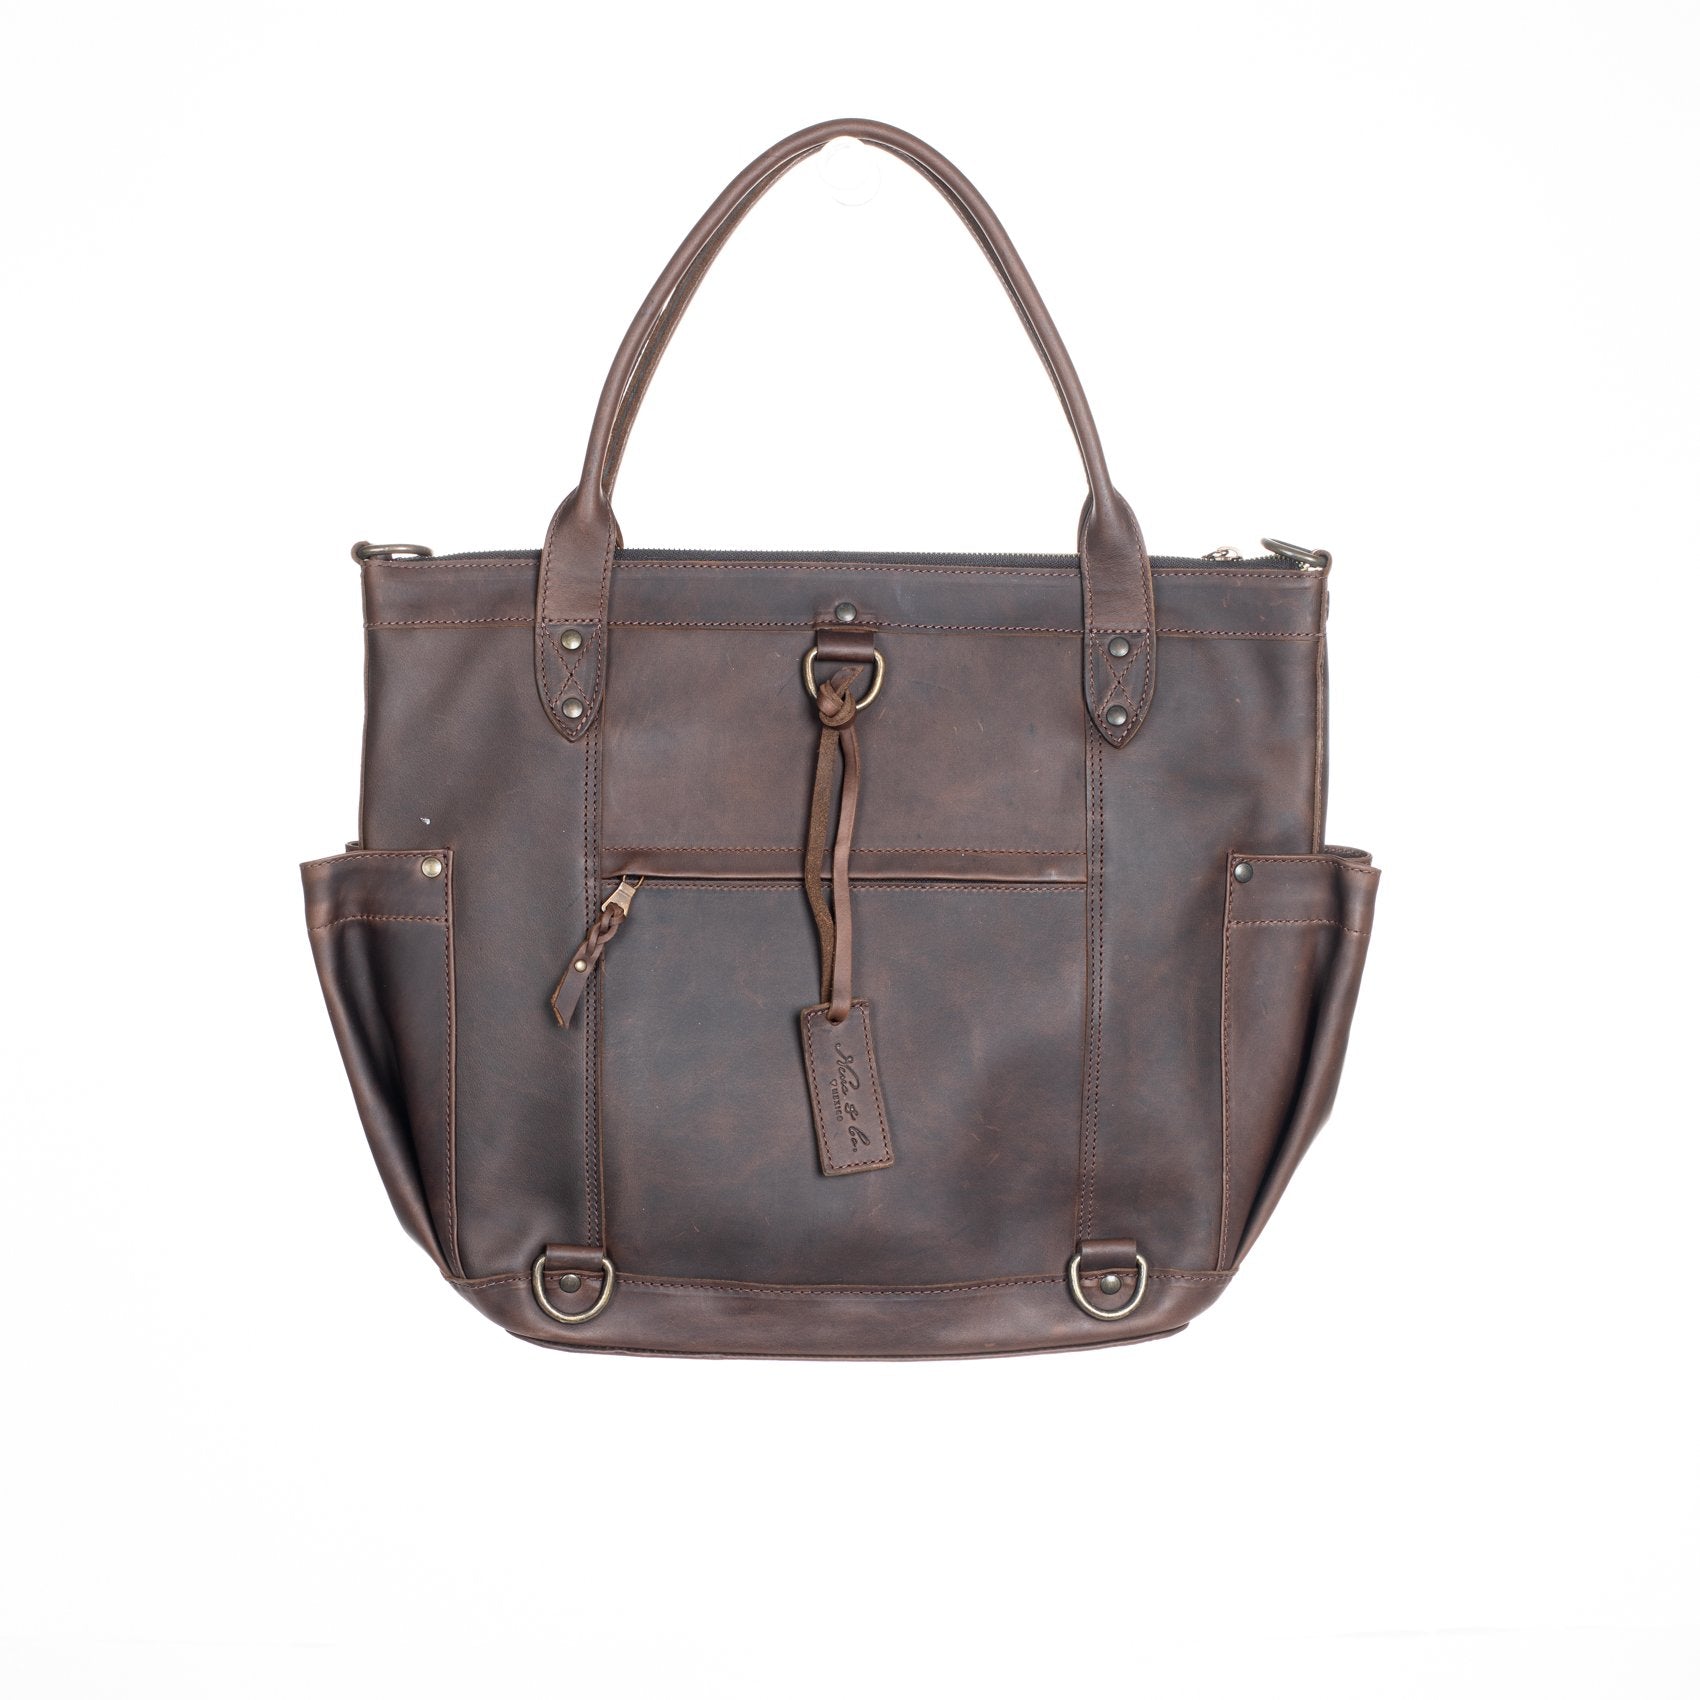 THE PERFECT BAG FULL - MEXICO COLLECTION - HANDWOVEN PANEL NO. 99116 - PAINTHORSE TUMBLED LEATHER